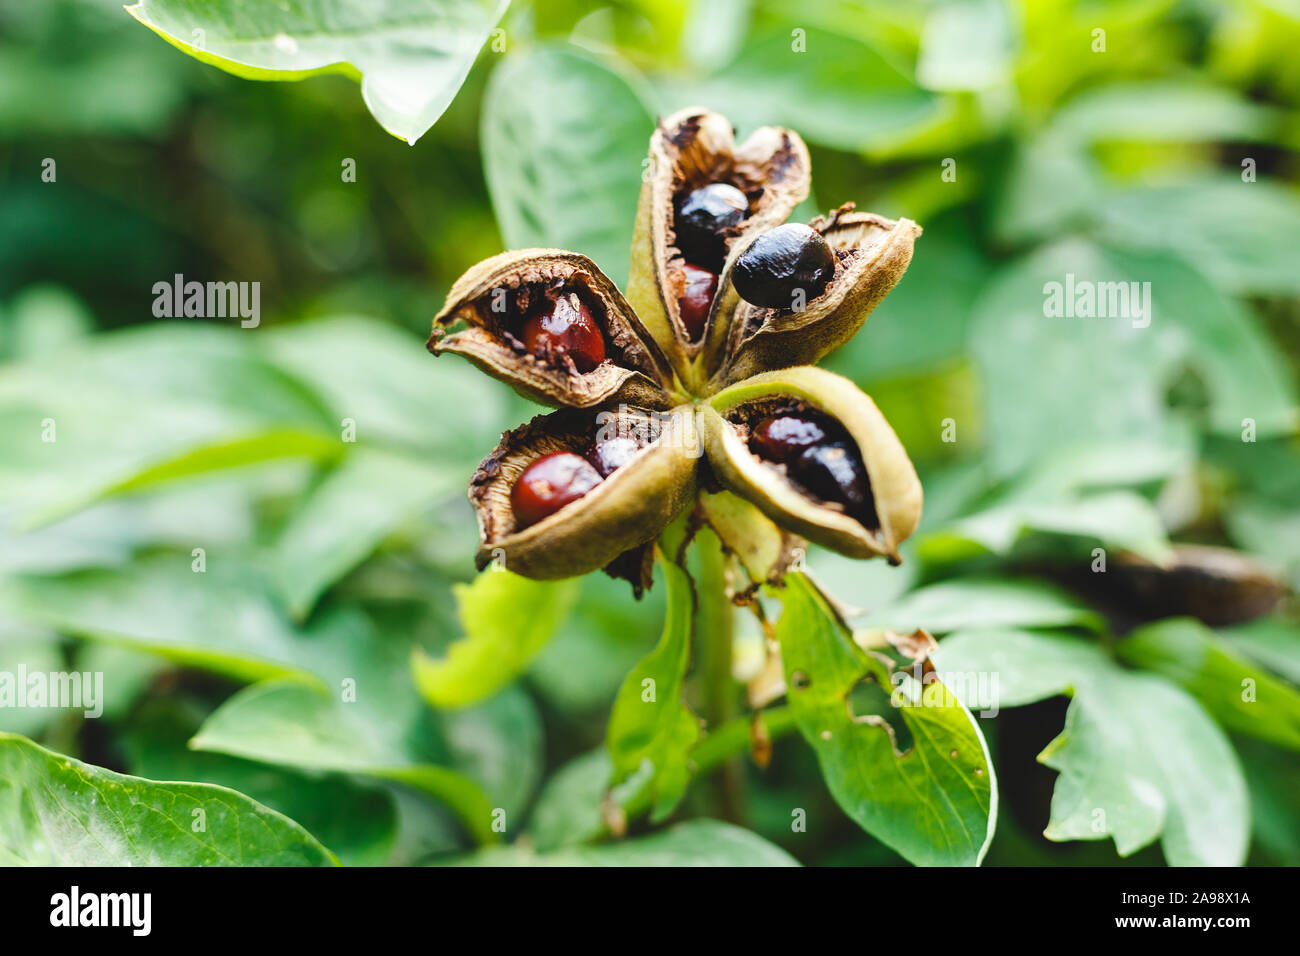 Paeonia suffruticosa seeds in stars. Peony flower tree seeds on the green leaves background. Paeonia, semi-shrub symbol in Chinese culture. Seeds of Stock Photo